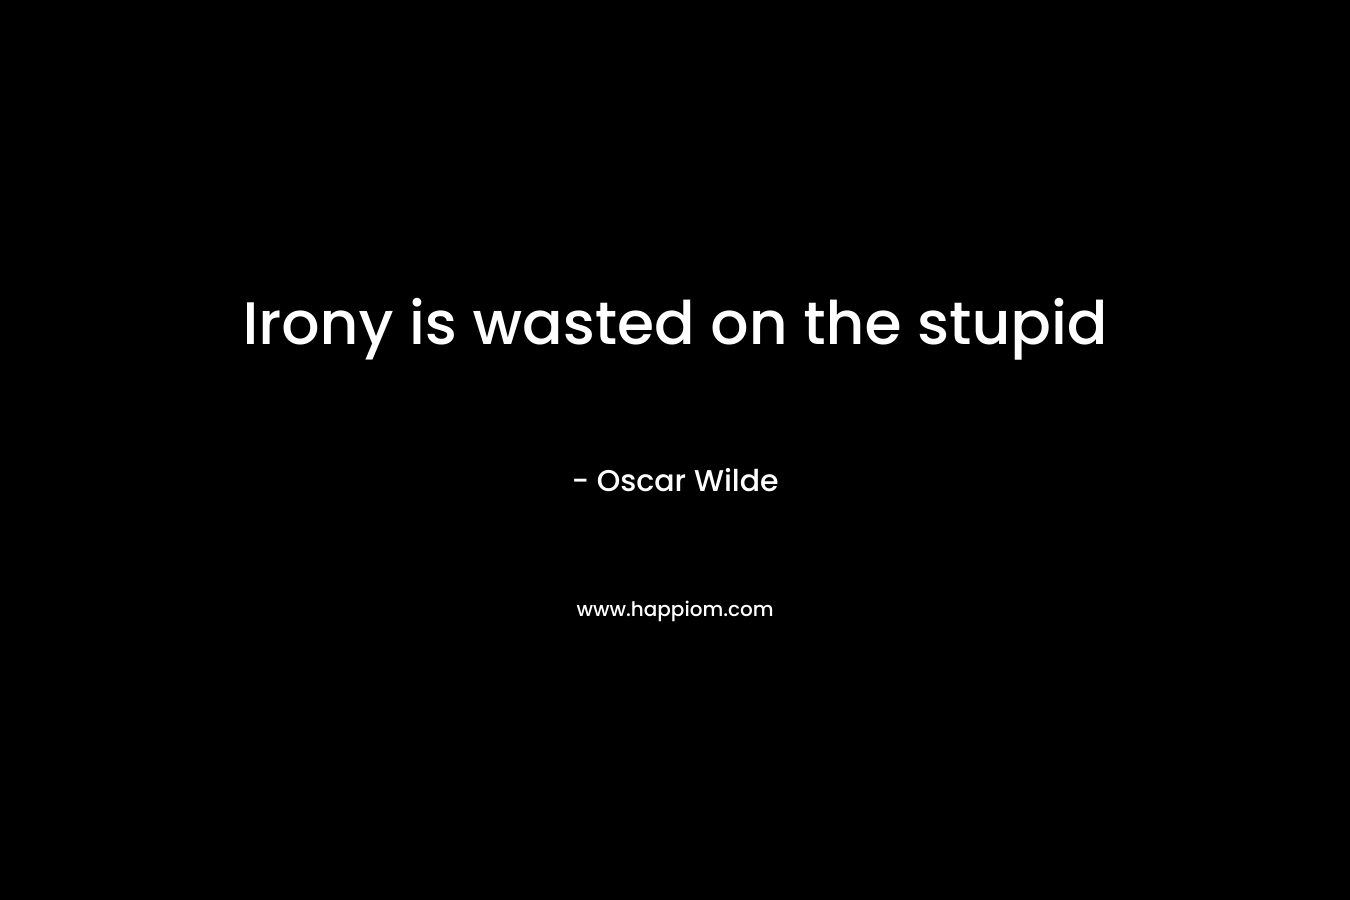 Irony is wasted on the stupid – Oscar Wilde